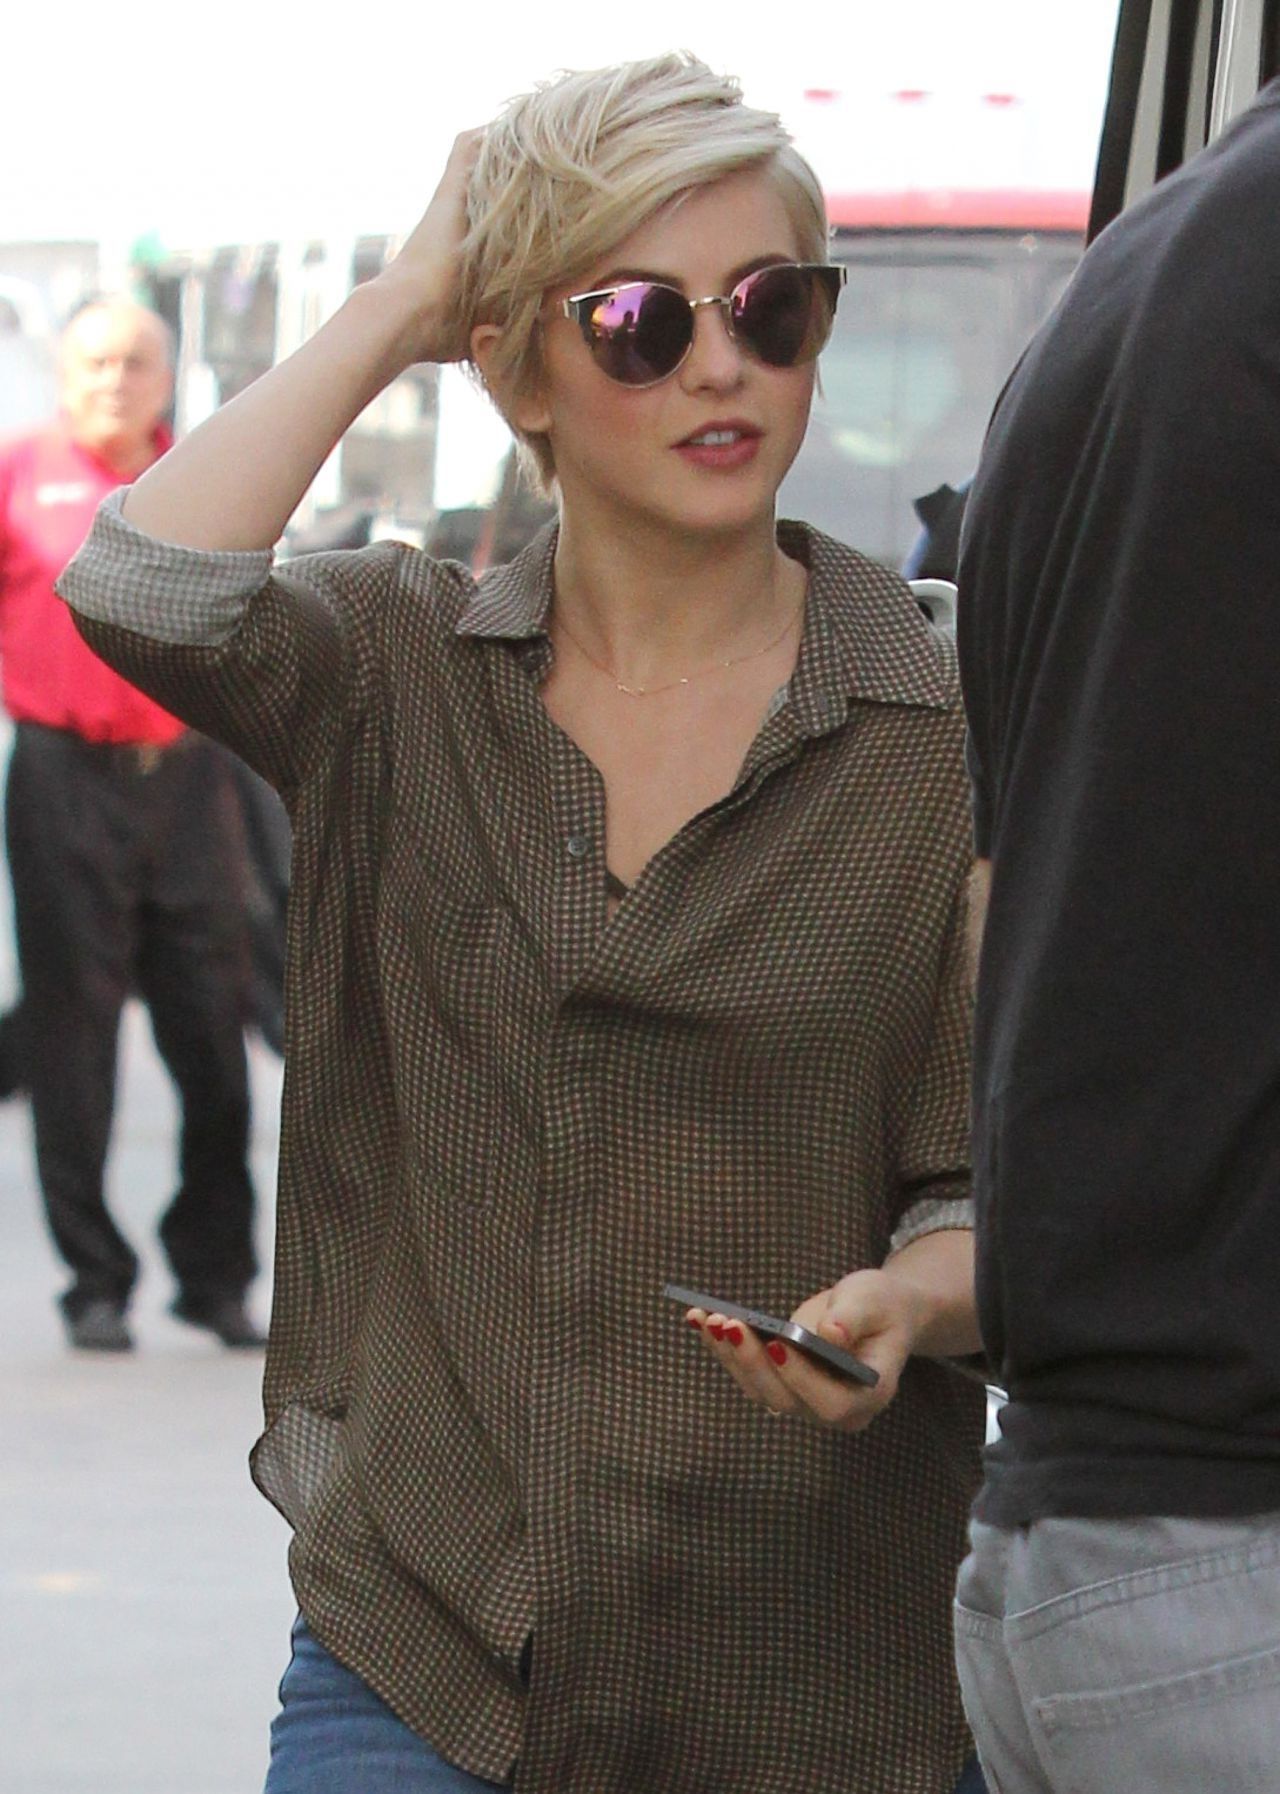 Julianne Hough Short Hair 2014 Julianne Hough At Lax Airport Throughout Most Recently Julianne Hough Pixie Hairstyles (View 4 of 16)